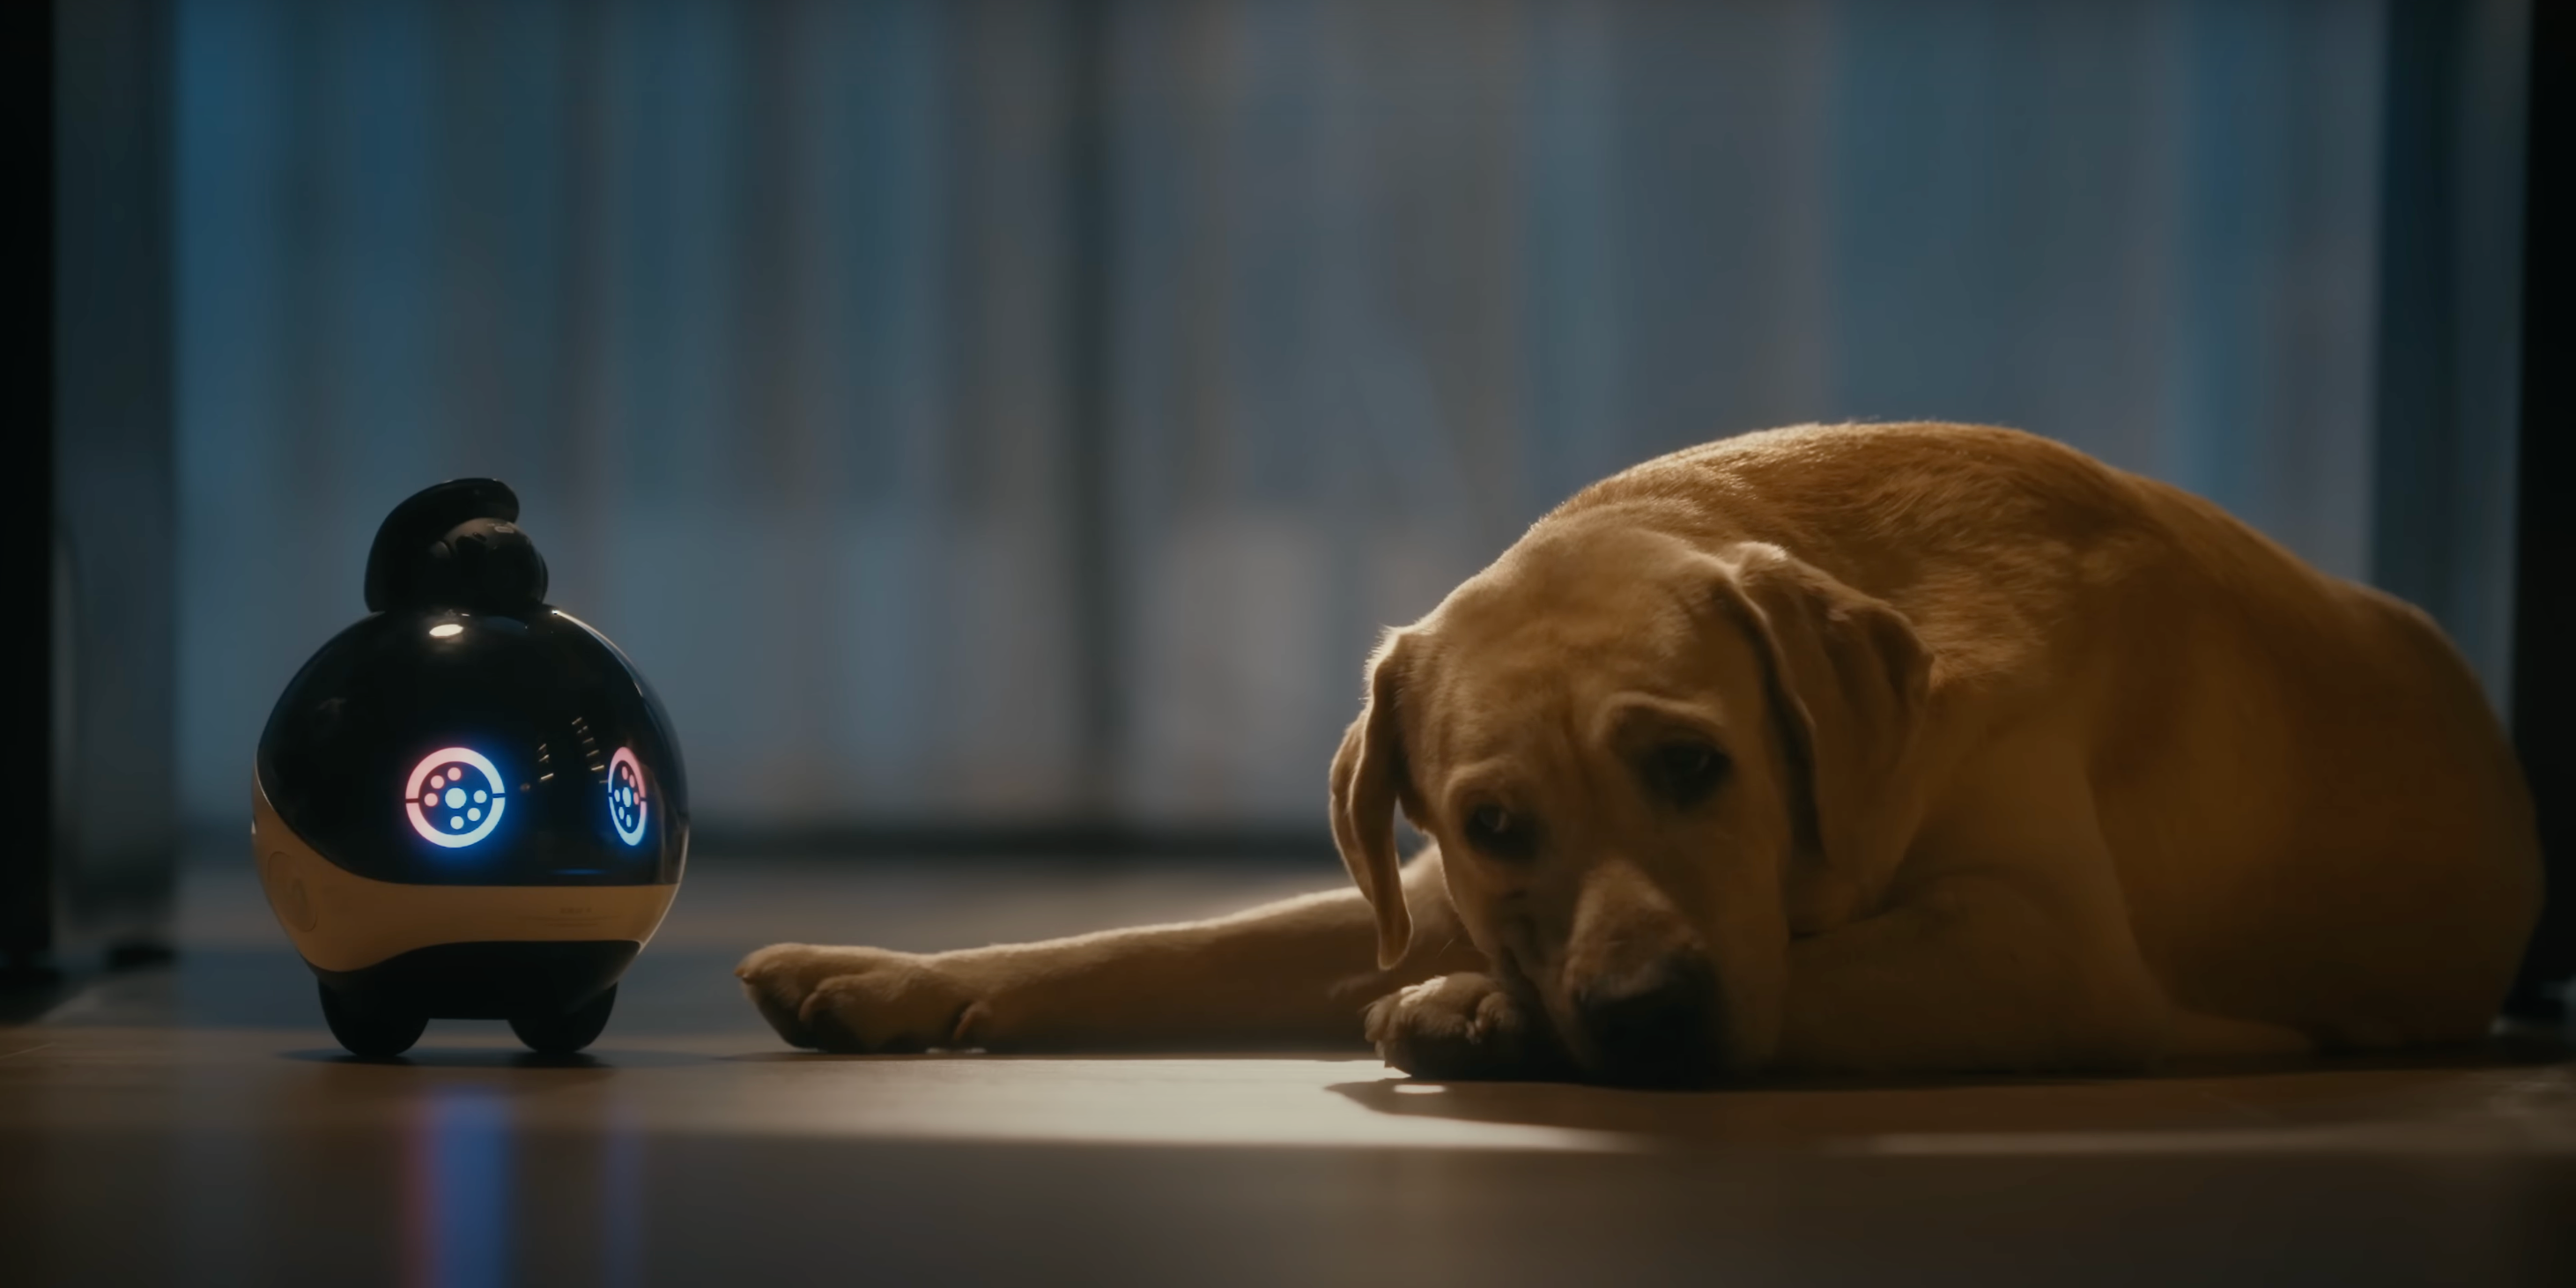 The EBO X robot is pictured with its eyes lit up standing next to a labrador retriever who is relaxing on the floor